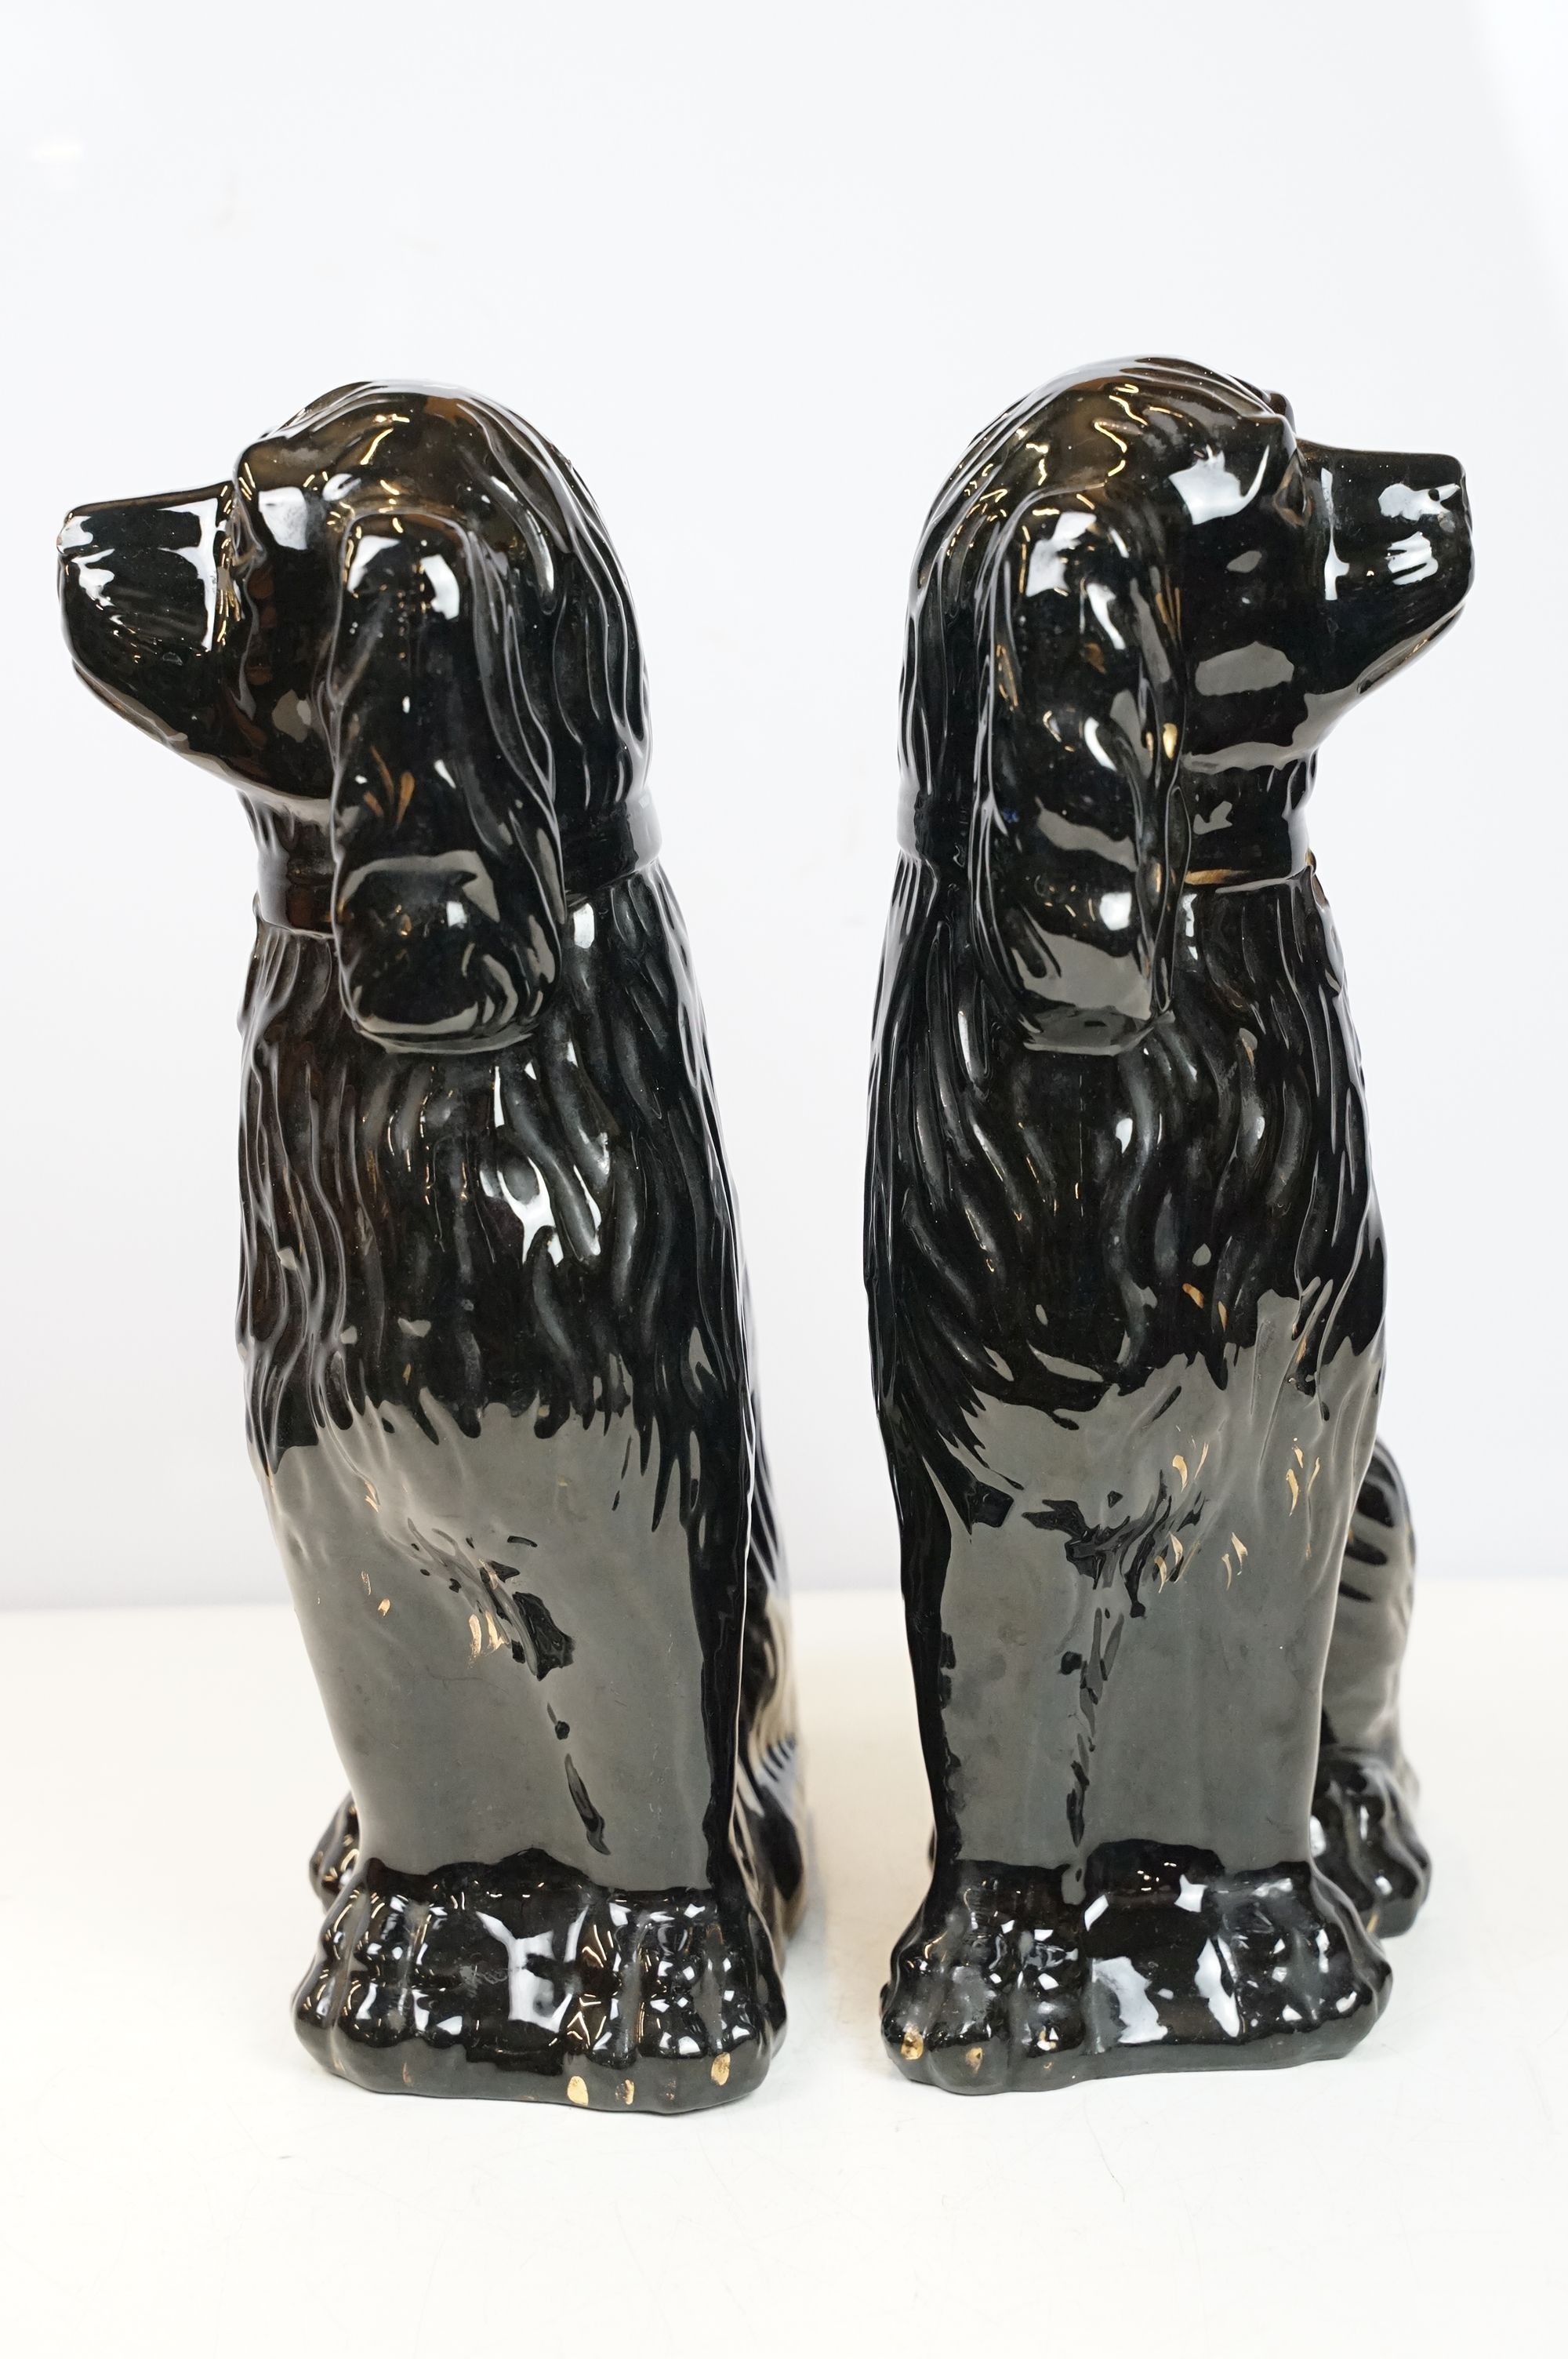 Pair of black cats in Staffordshire style, 35cm high - Image 7 of 8